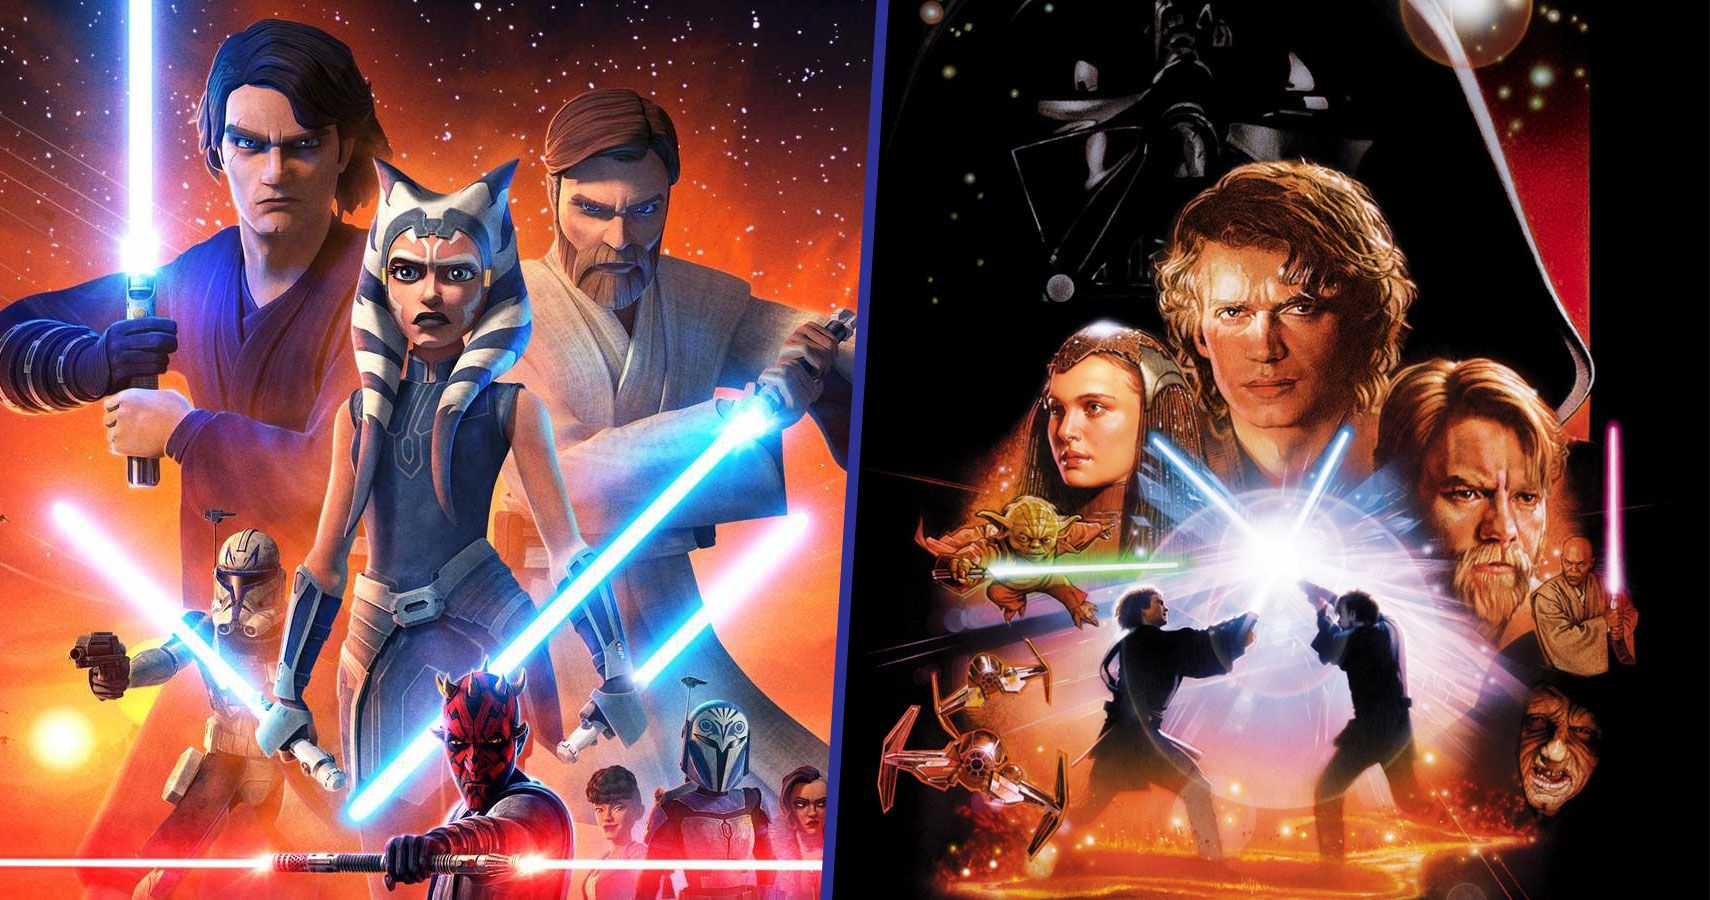 How Many Star Wars Movies Are There? Let's Count Them Together